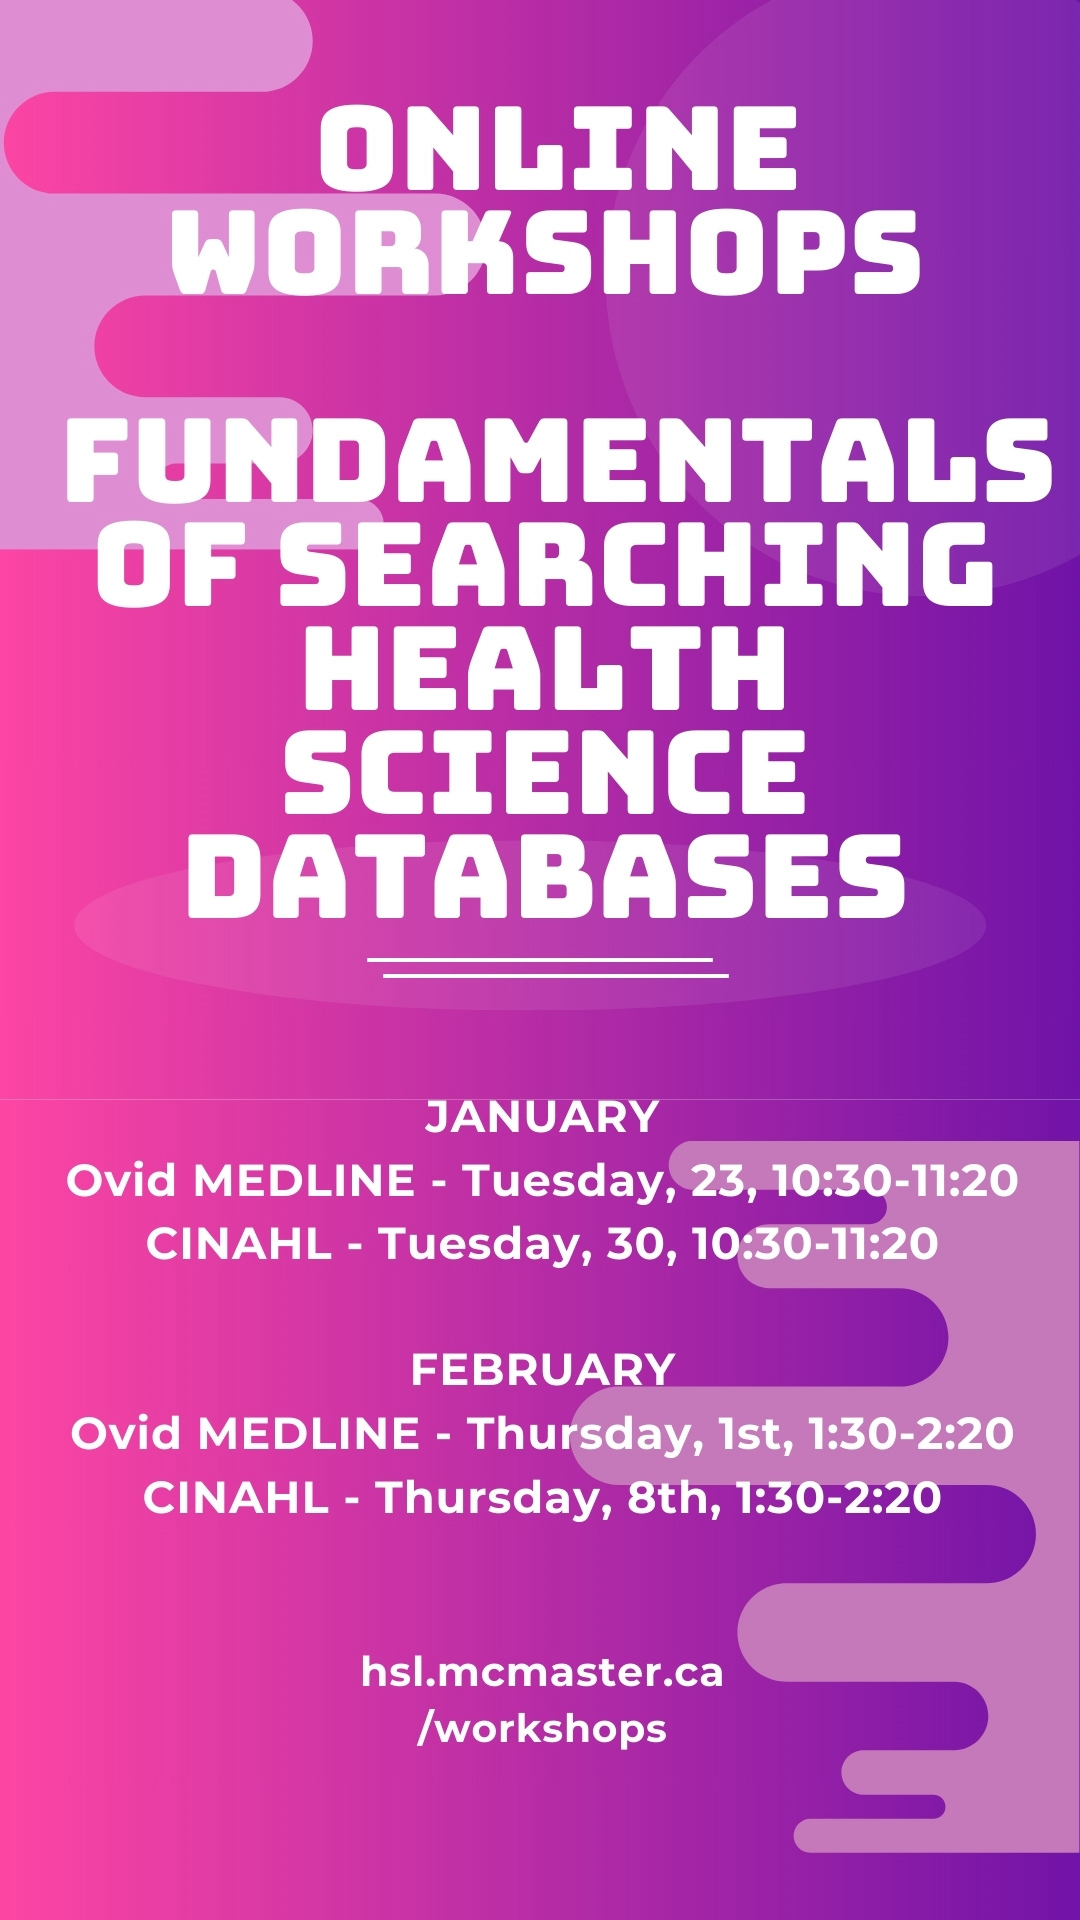 Online Workshops
Fundamentals of Searching Health Science Databases

